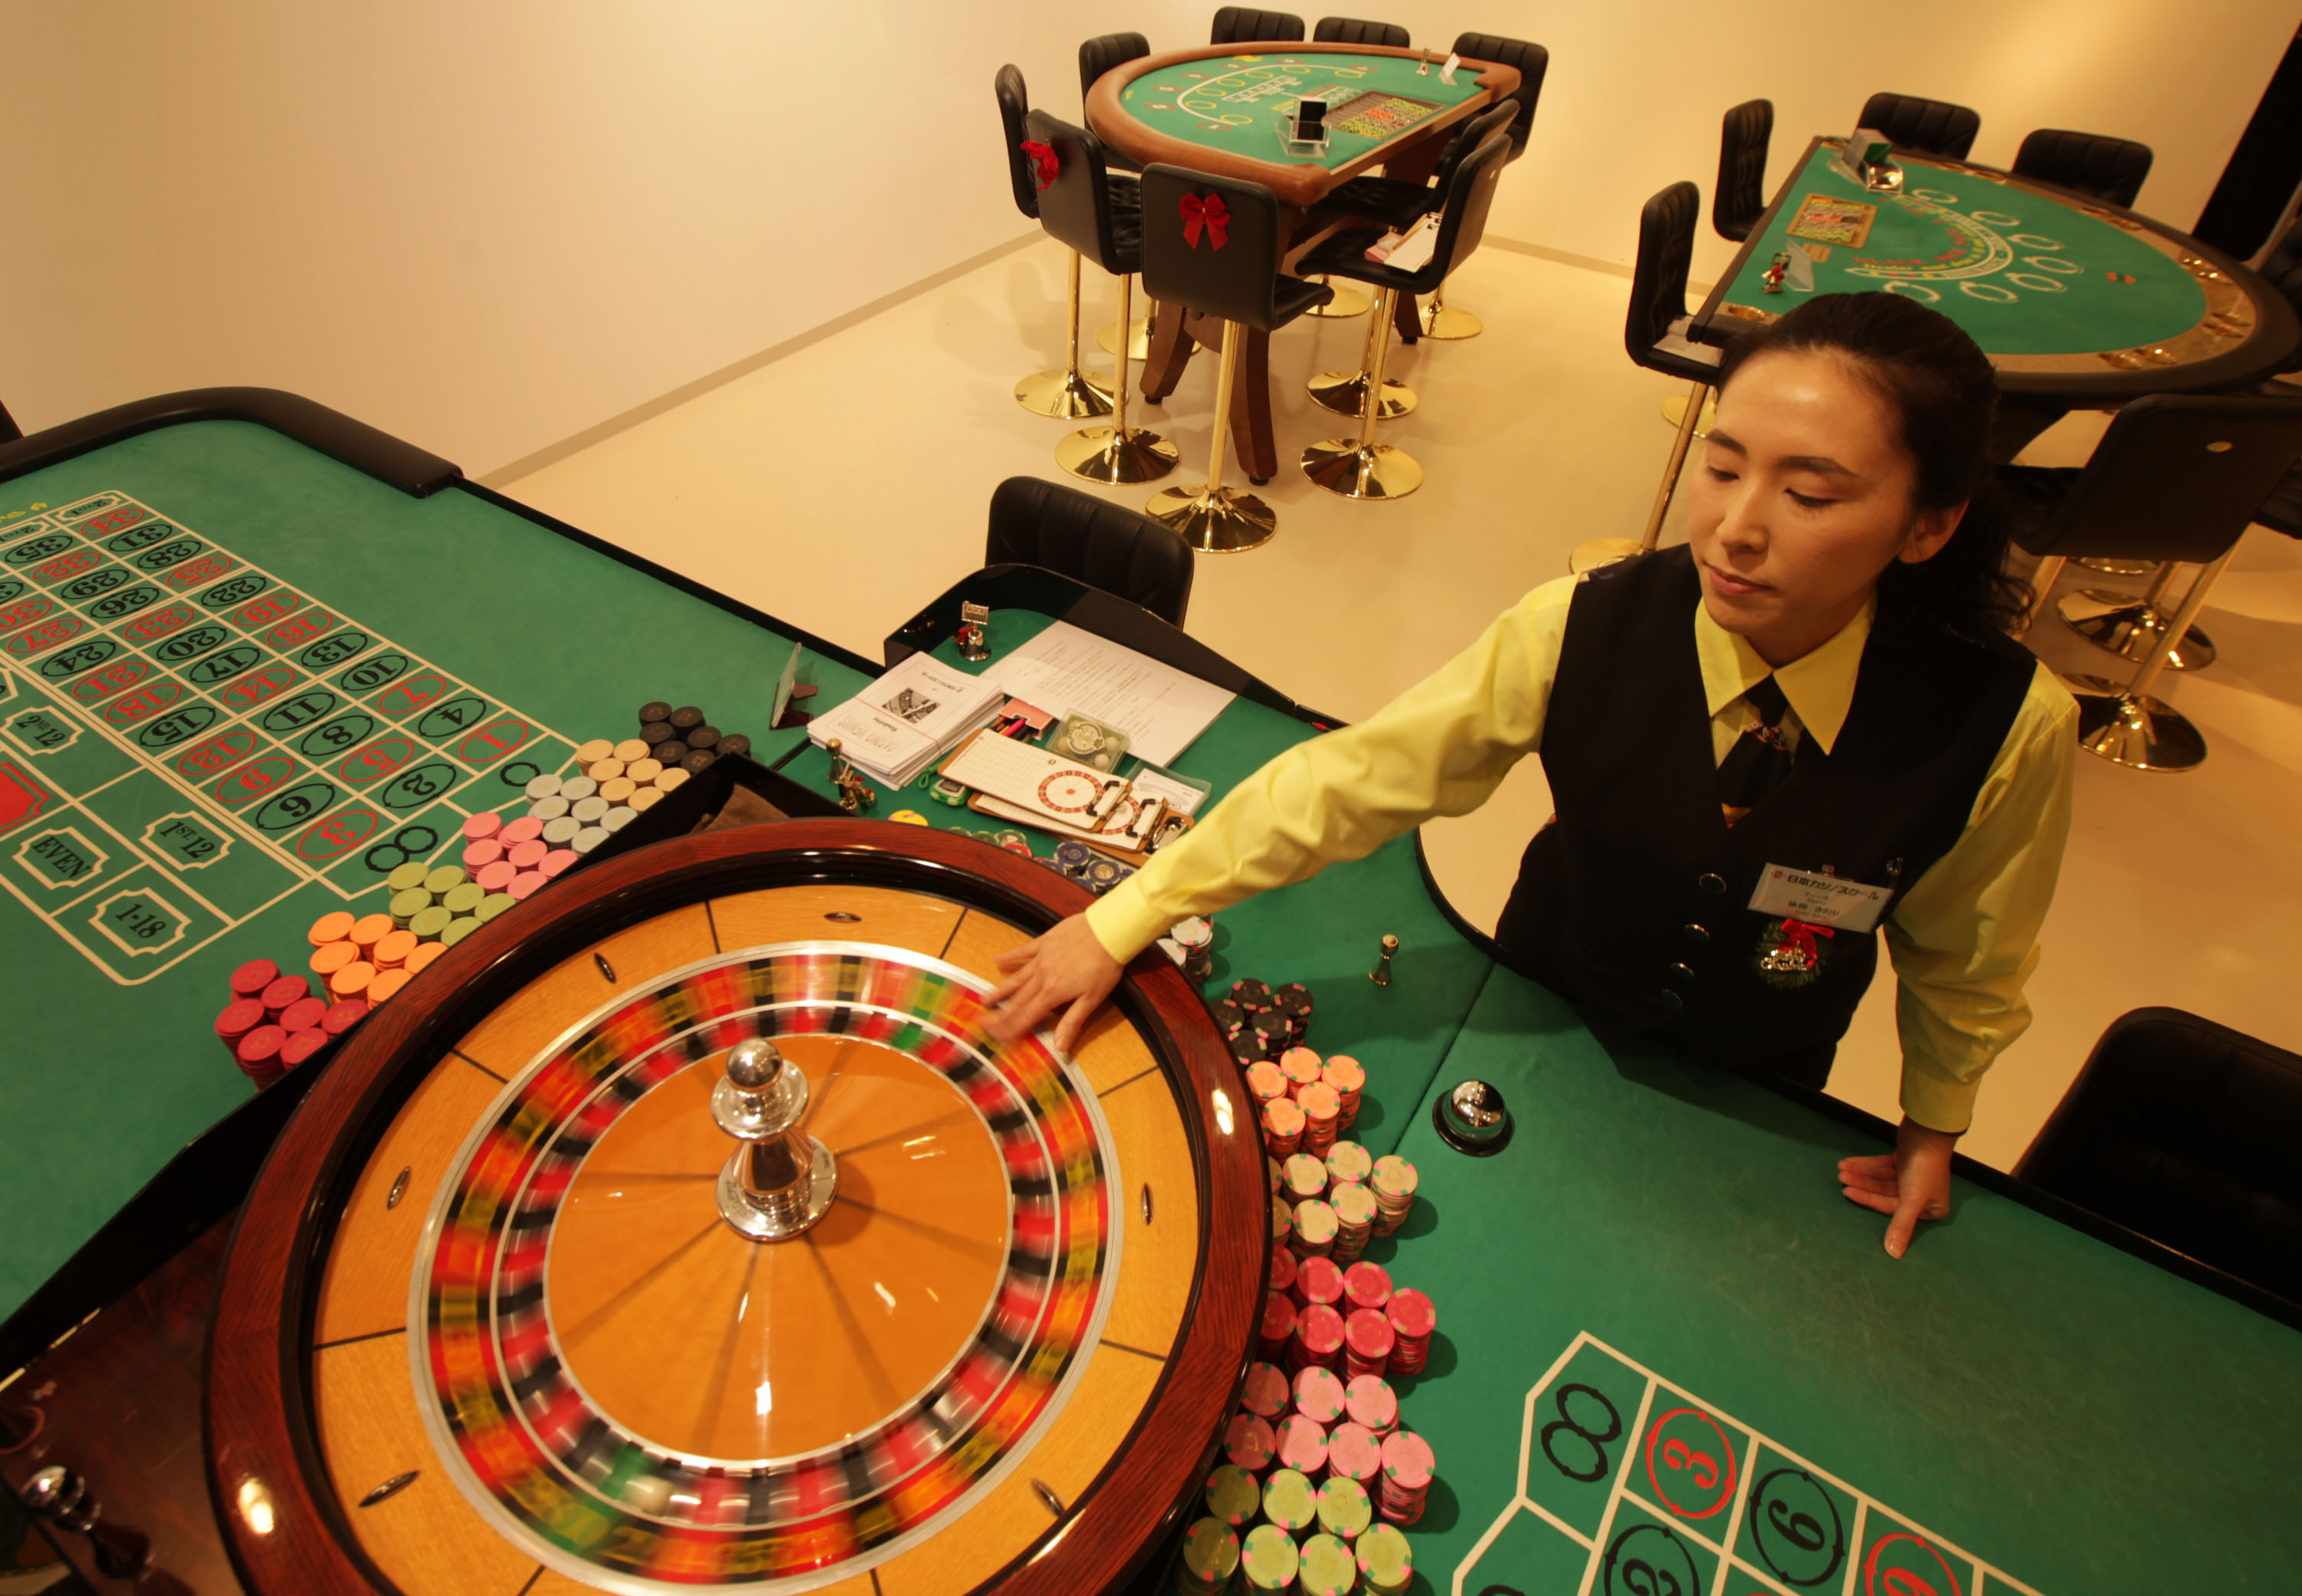 Wheel of fortune: A croupier warms up a roulette wheel at Casino Venus, a mock casino operated by Japan Casino School and Bright Inc. to teach people how to be dealers, in Tokyo on Wednesday. | BLOOMBERG PHOTO